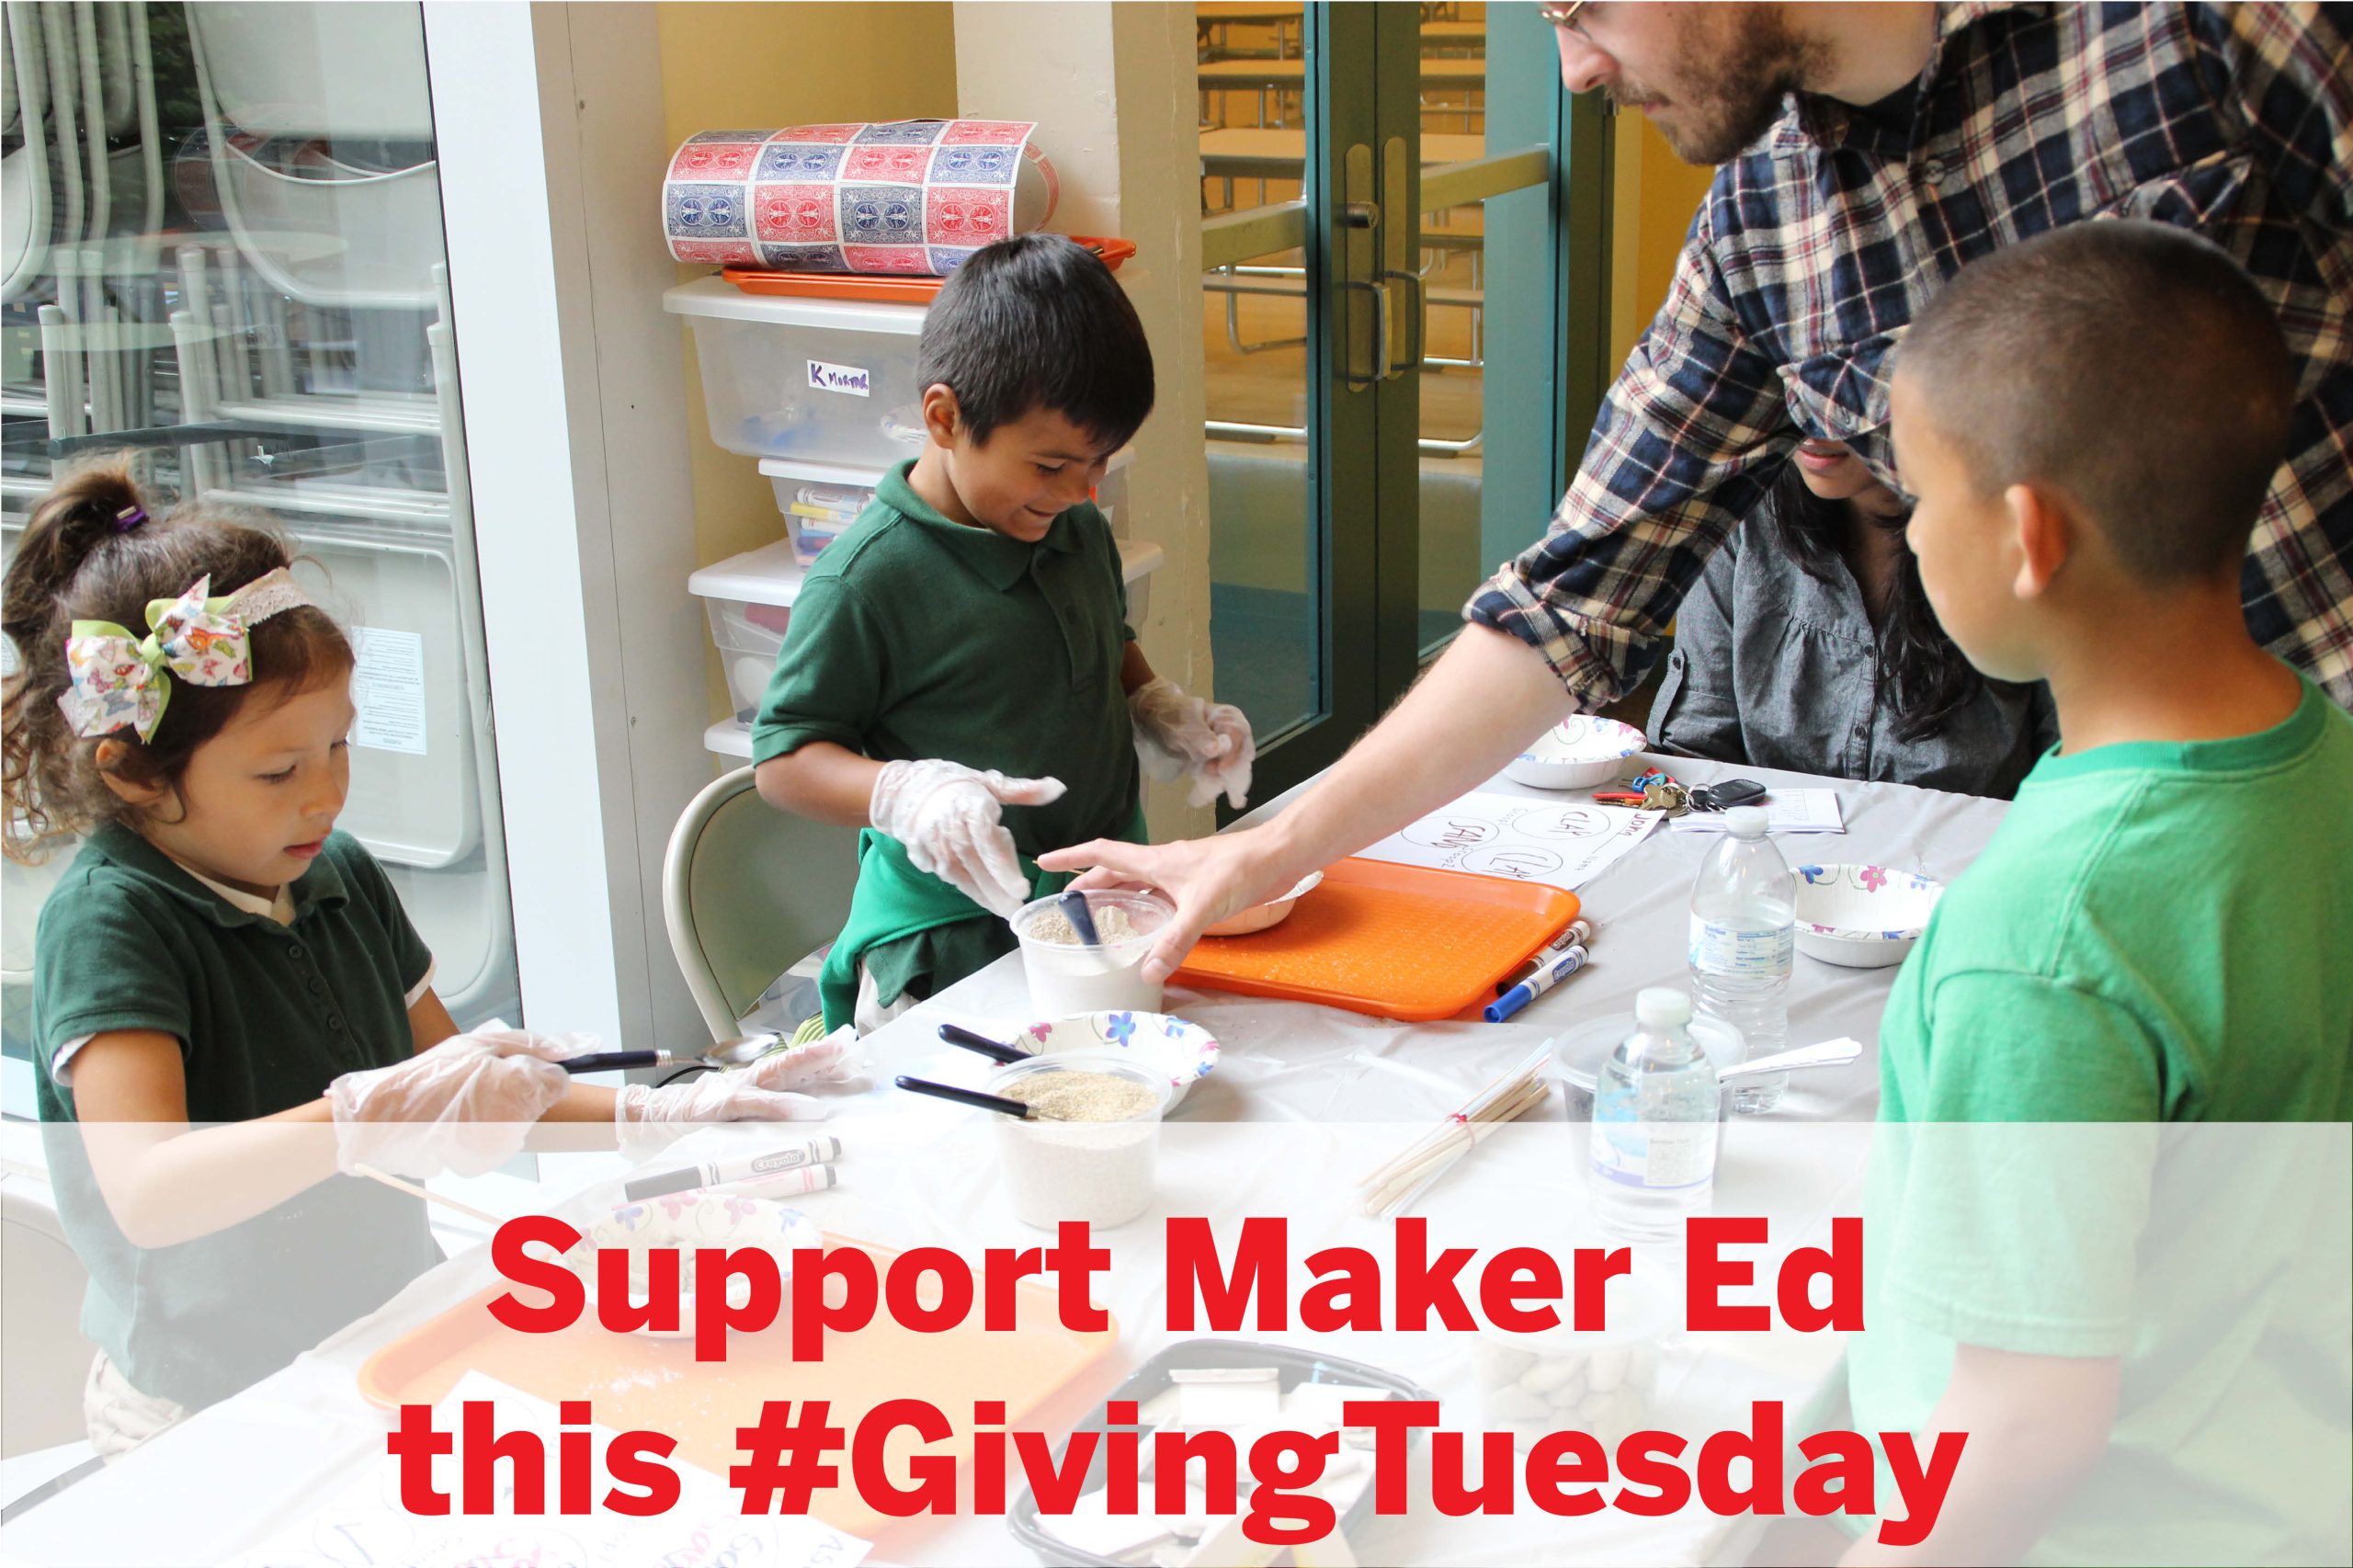 Making Today Count with Maker Ed and #GivingTuesday